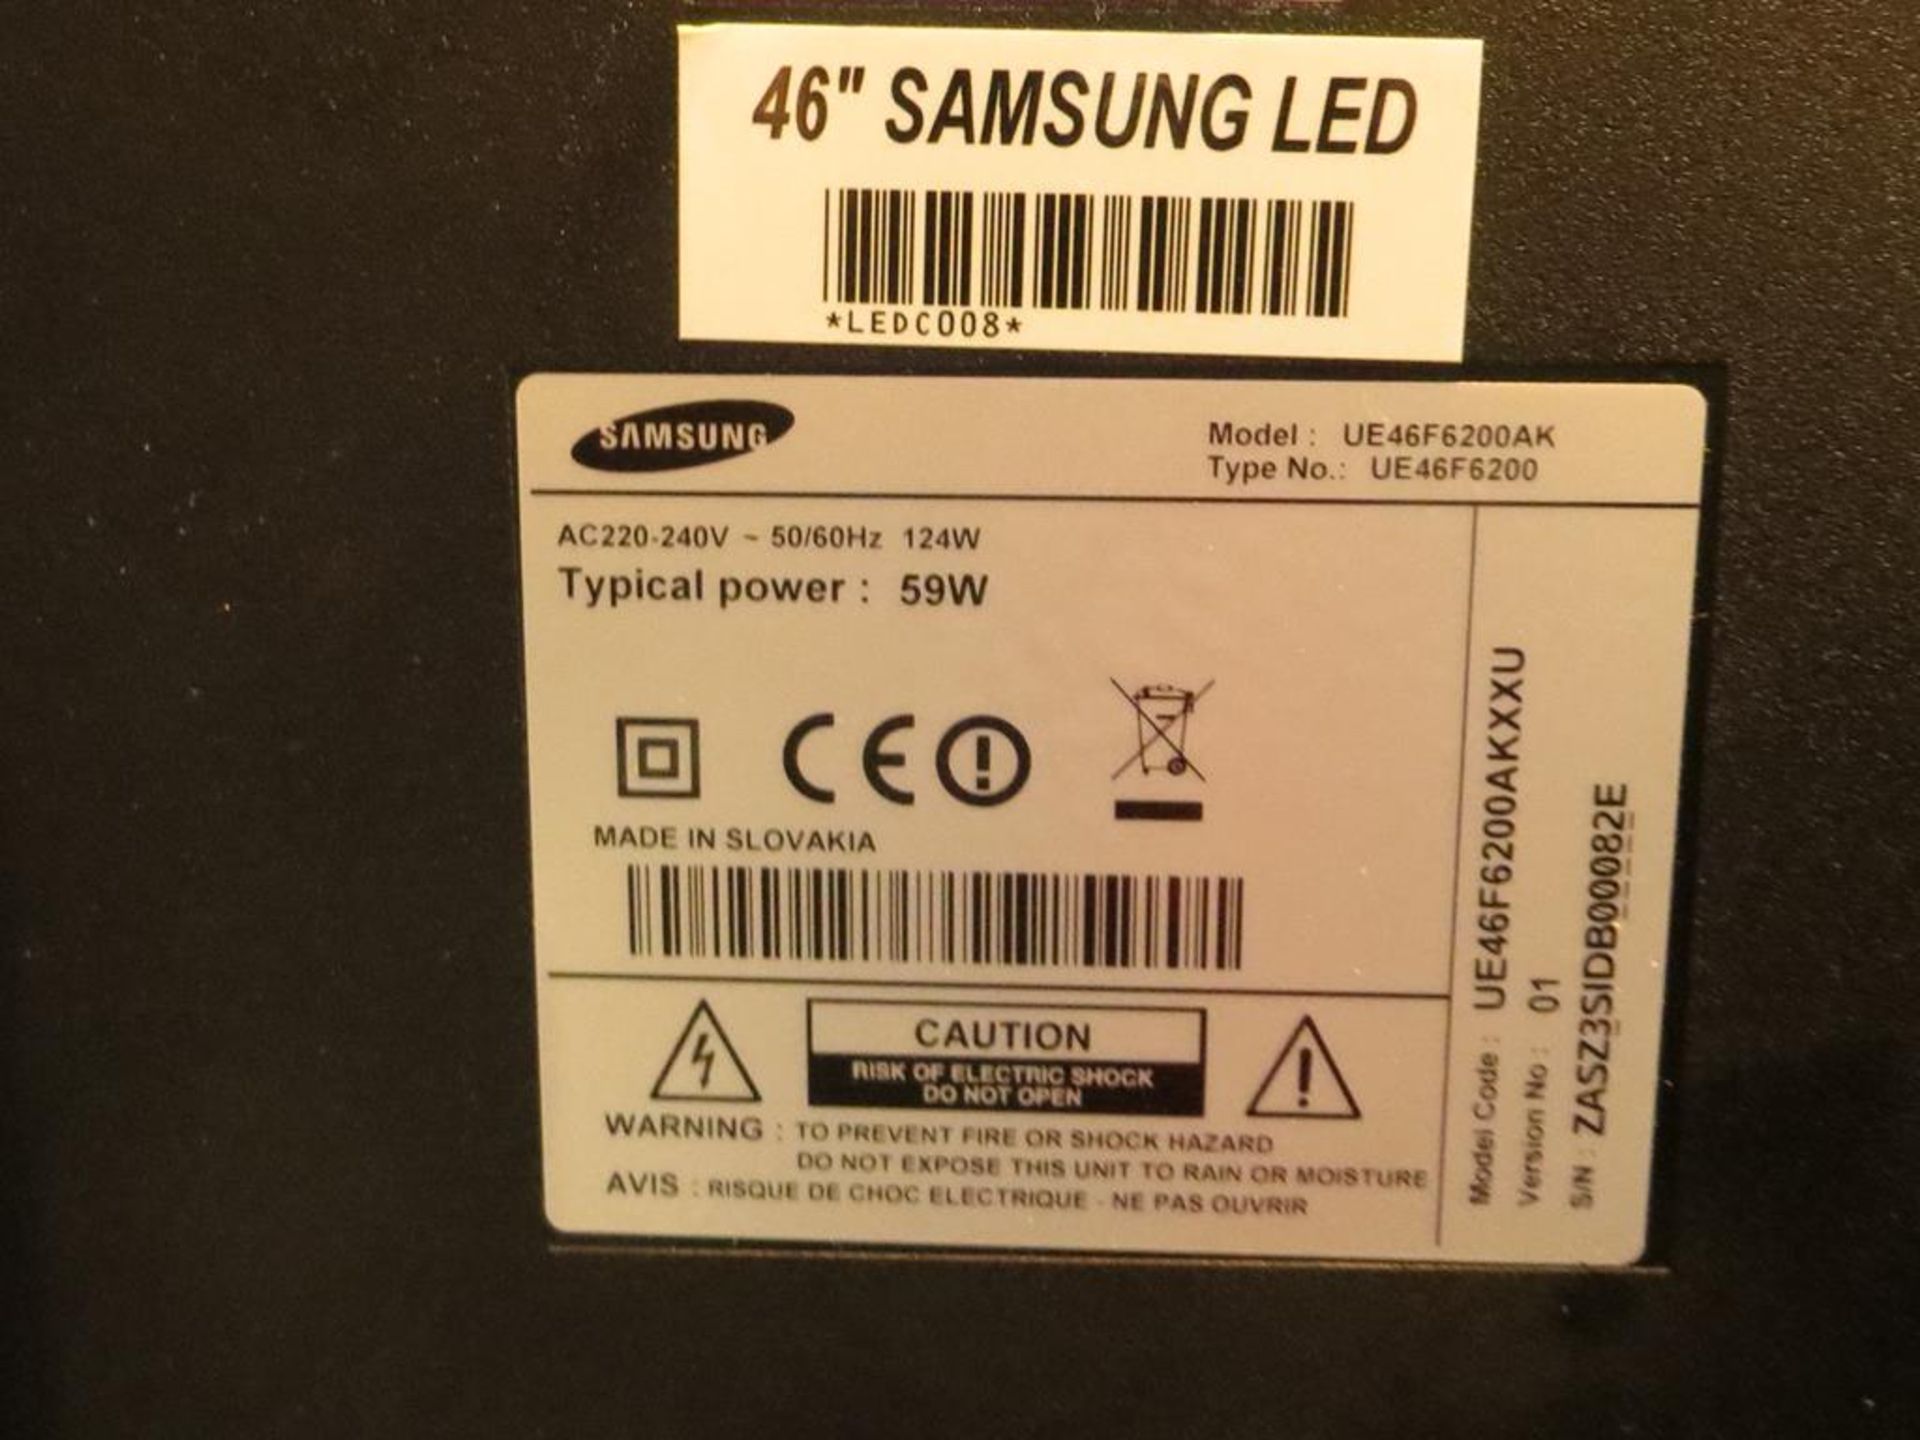 Samsung, 46" LED monitor, Model VE46F6200AM with Unicol, mount and remote control in transit case: - Image 3 of 3